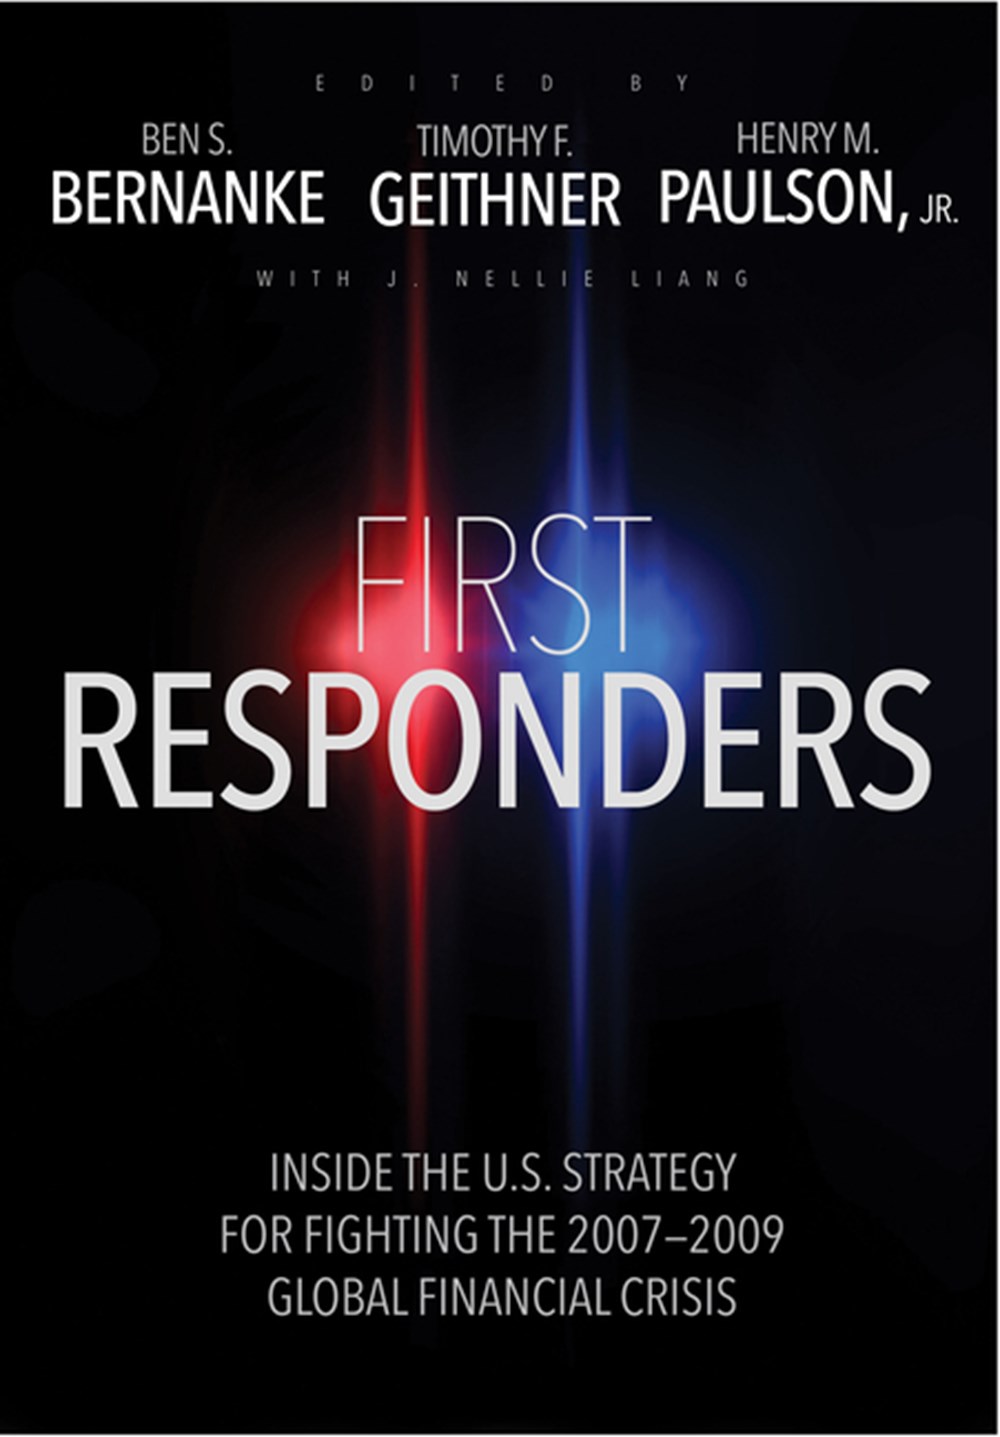 First Responders Inside the U.S. Strategy for Fighting the 2007-2009 Global Financial Crisis